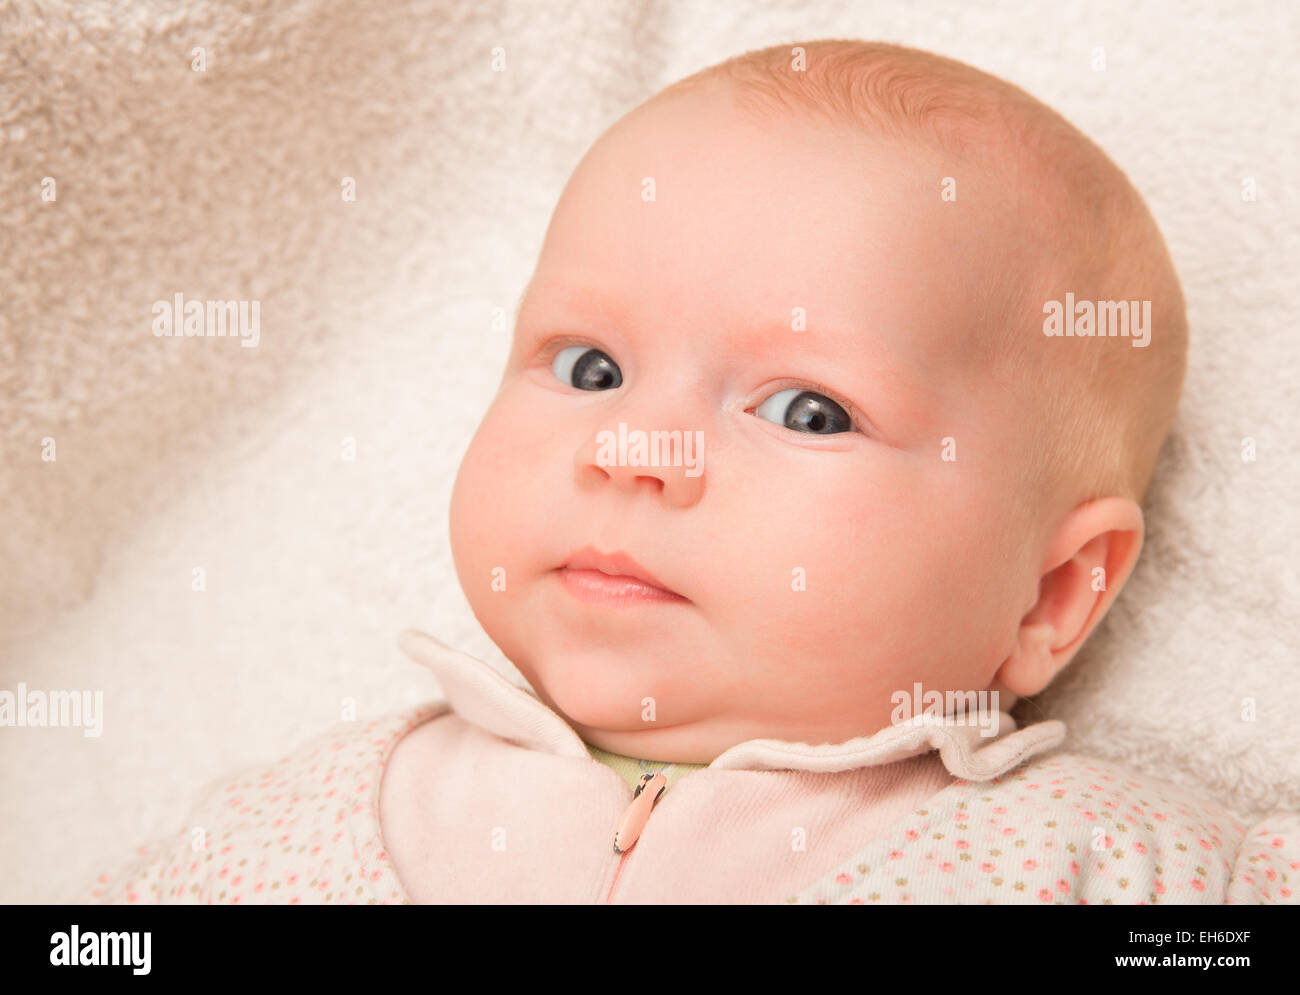 Two-month old baby girl on a light background Stock Photo